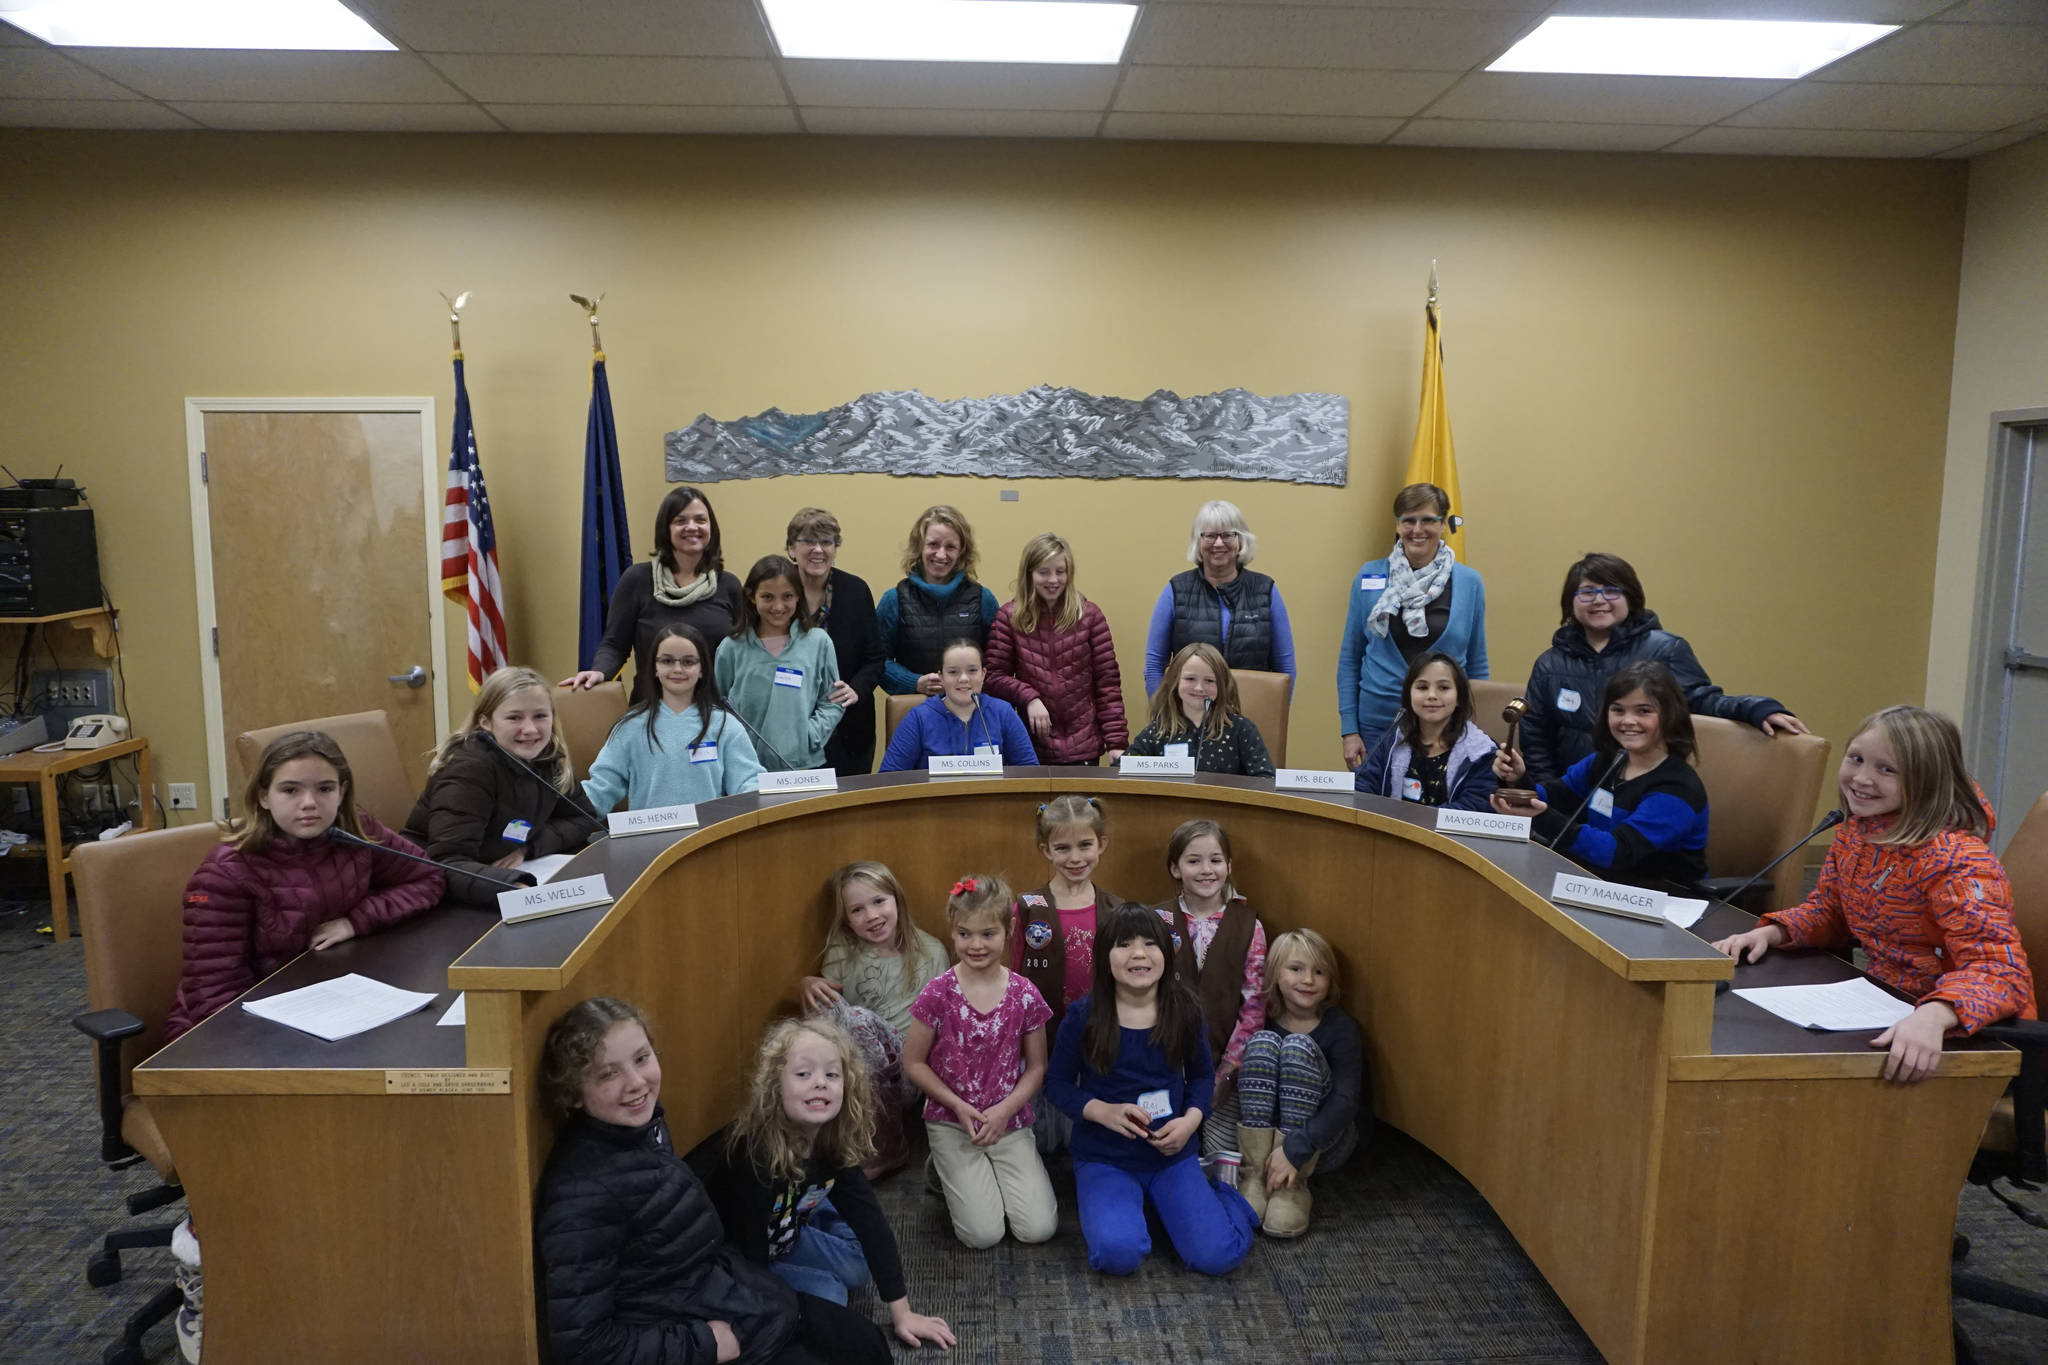 Members of Girl Scout Troops 280, 226, 134, 258 and 33, front, pose last Friday, Nov. 2, 2018, after a mock Homer City Council meeting in the Cowles Council Chambers at Homer City Hall, in Homer, Alaska. (Photo by Michael Armstrong/Homer News)